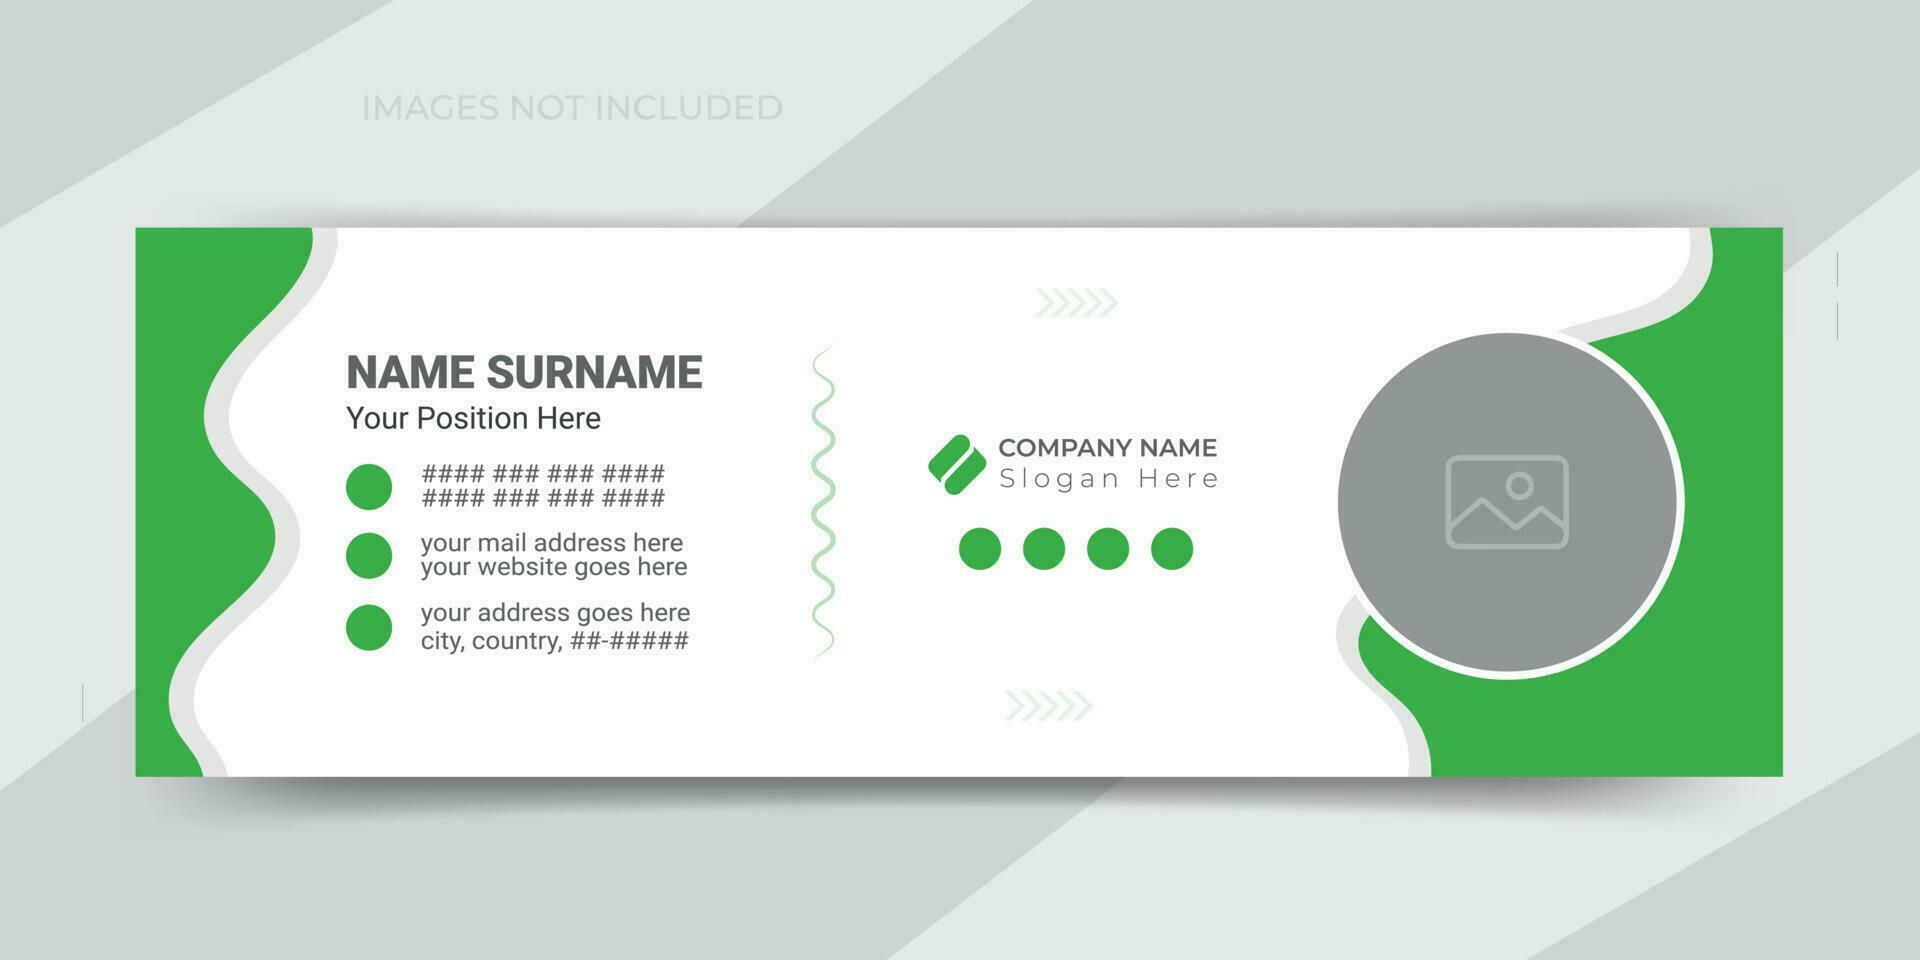 Minimal-style corporate business agency email signature or email footer template design vector